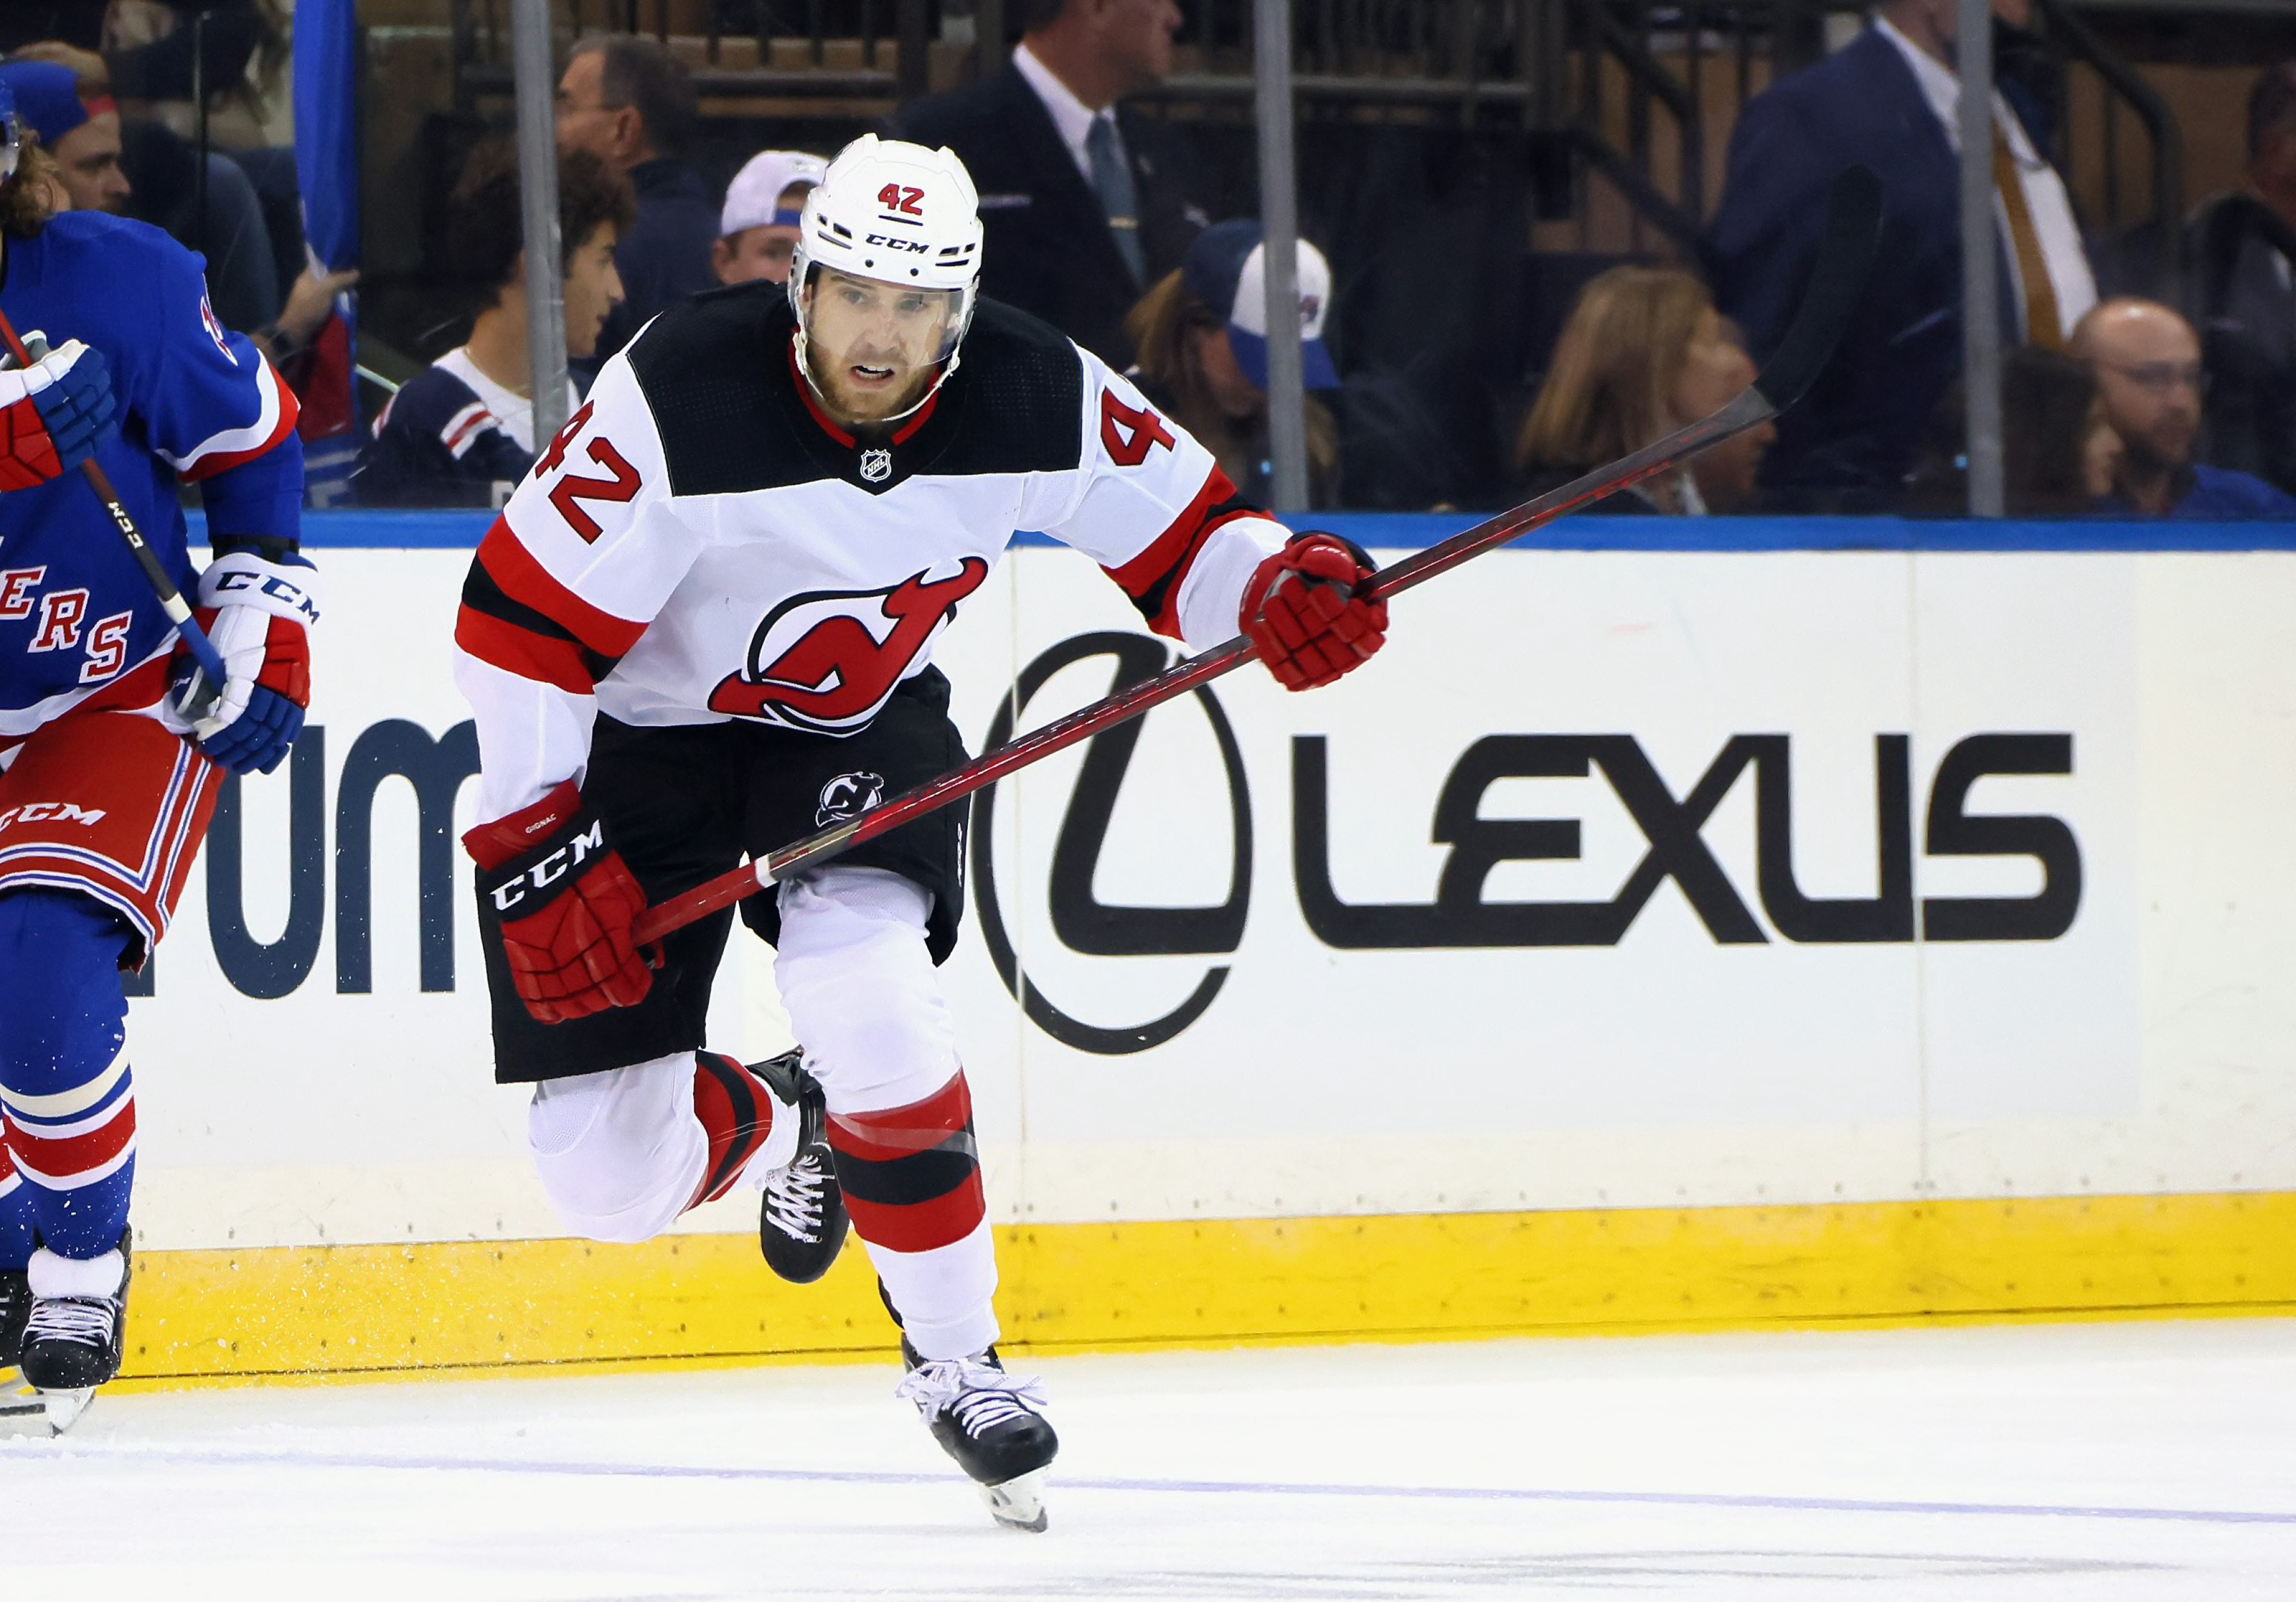 Should New Jersey Devils Give A.J. Greer An NHL Shot?